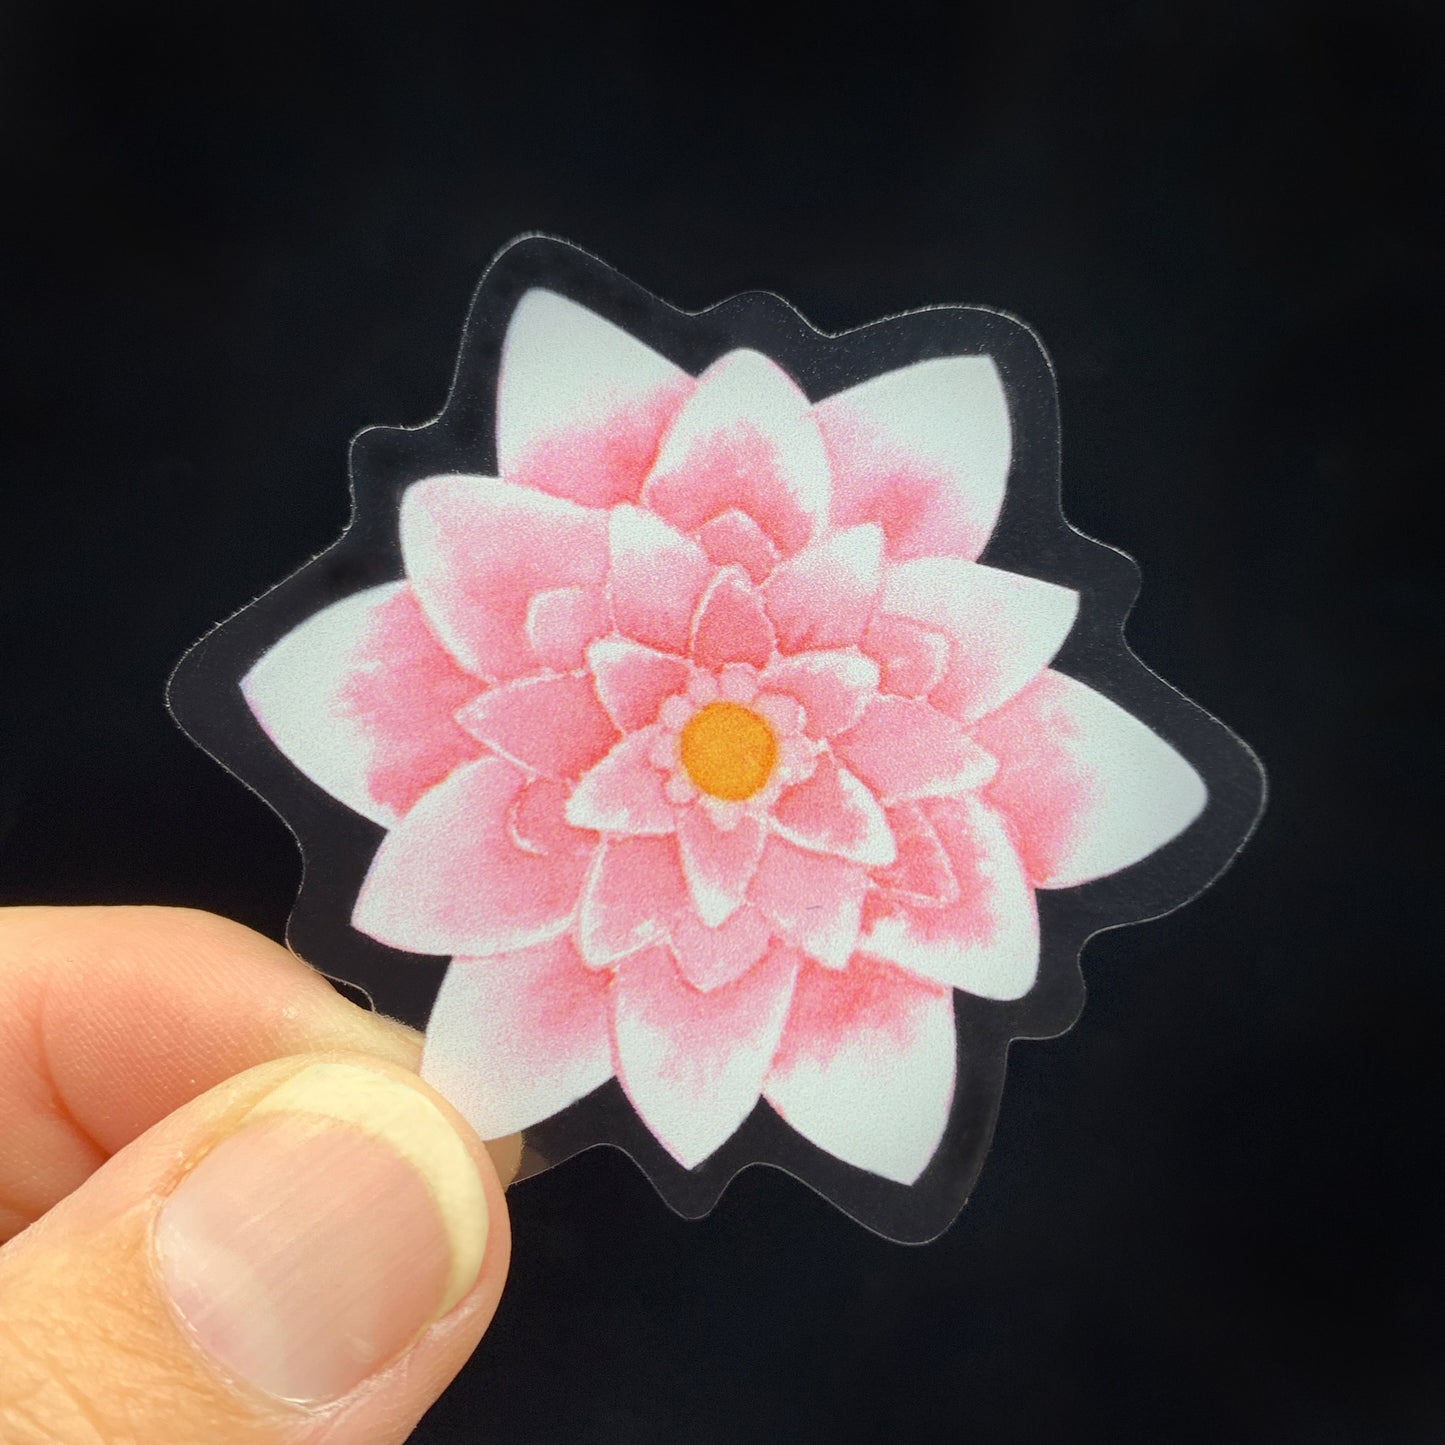 Sticker 'Waterlily', 3 pieces, transparent approx. 5x5cm water lily in watercolor